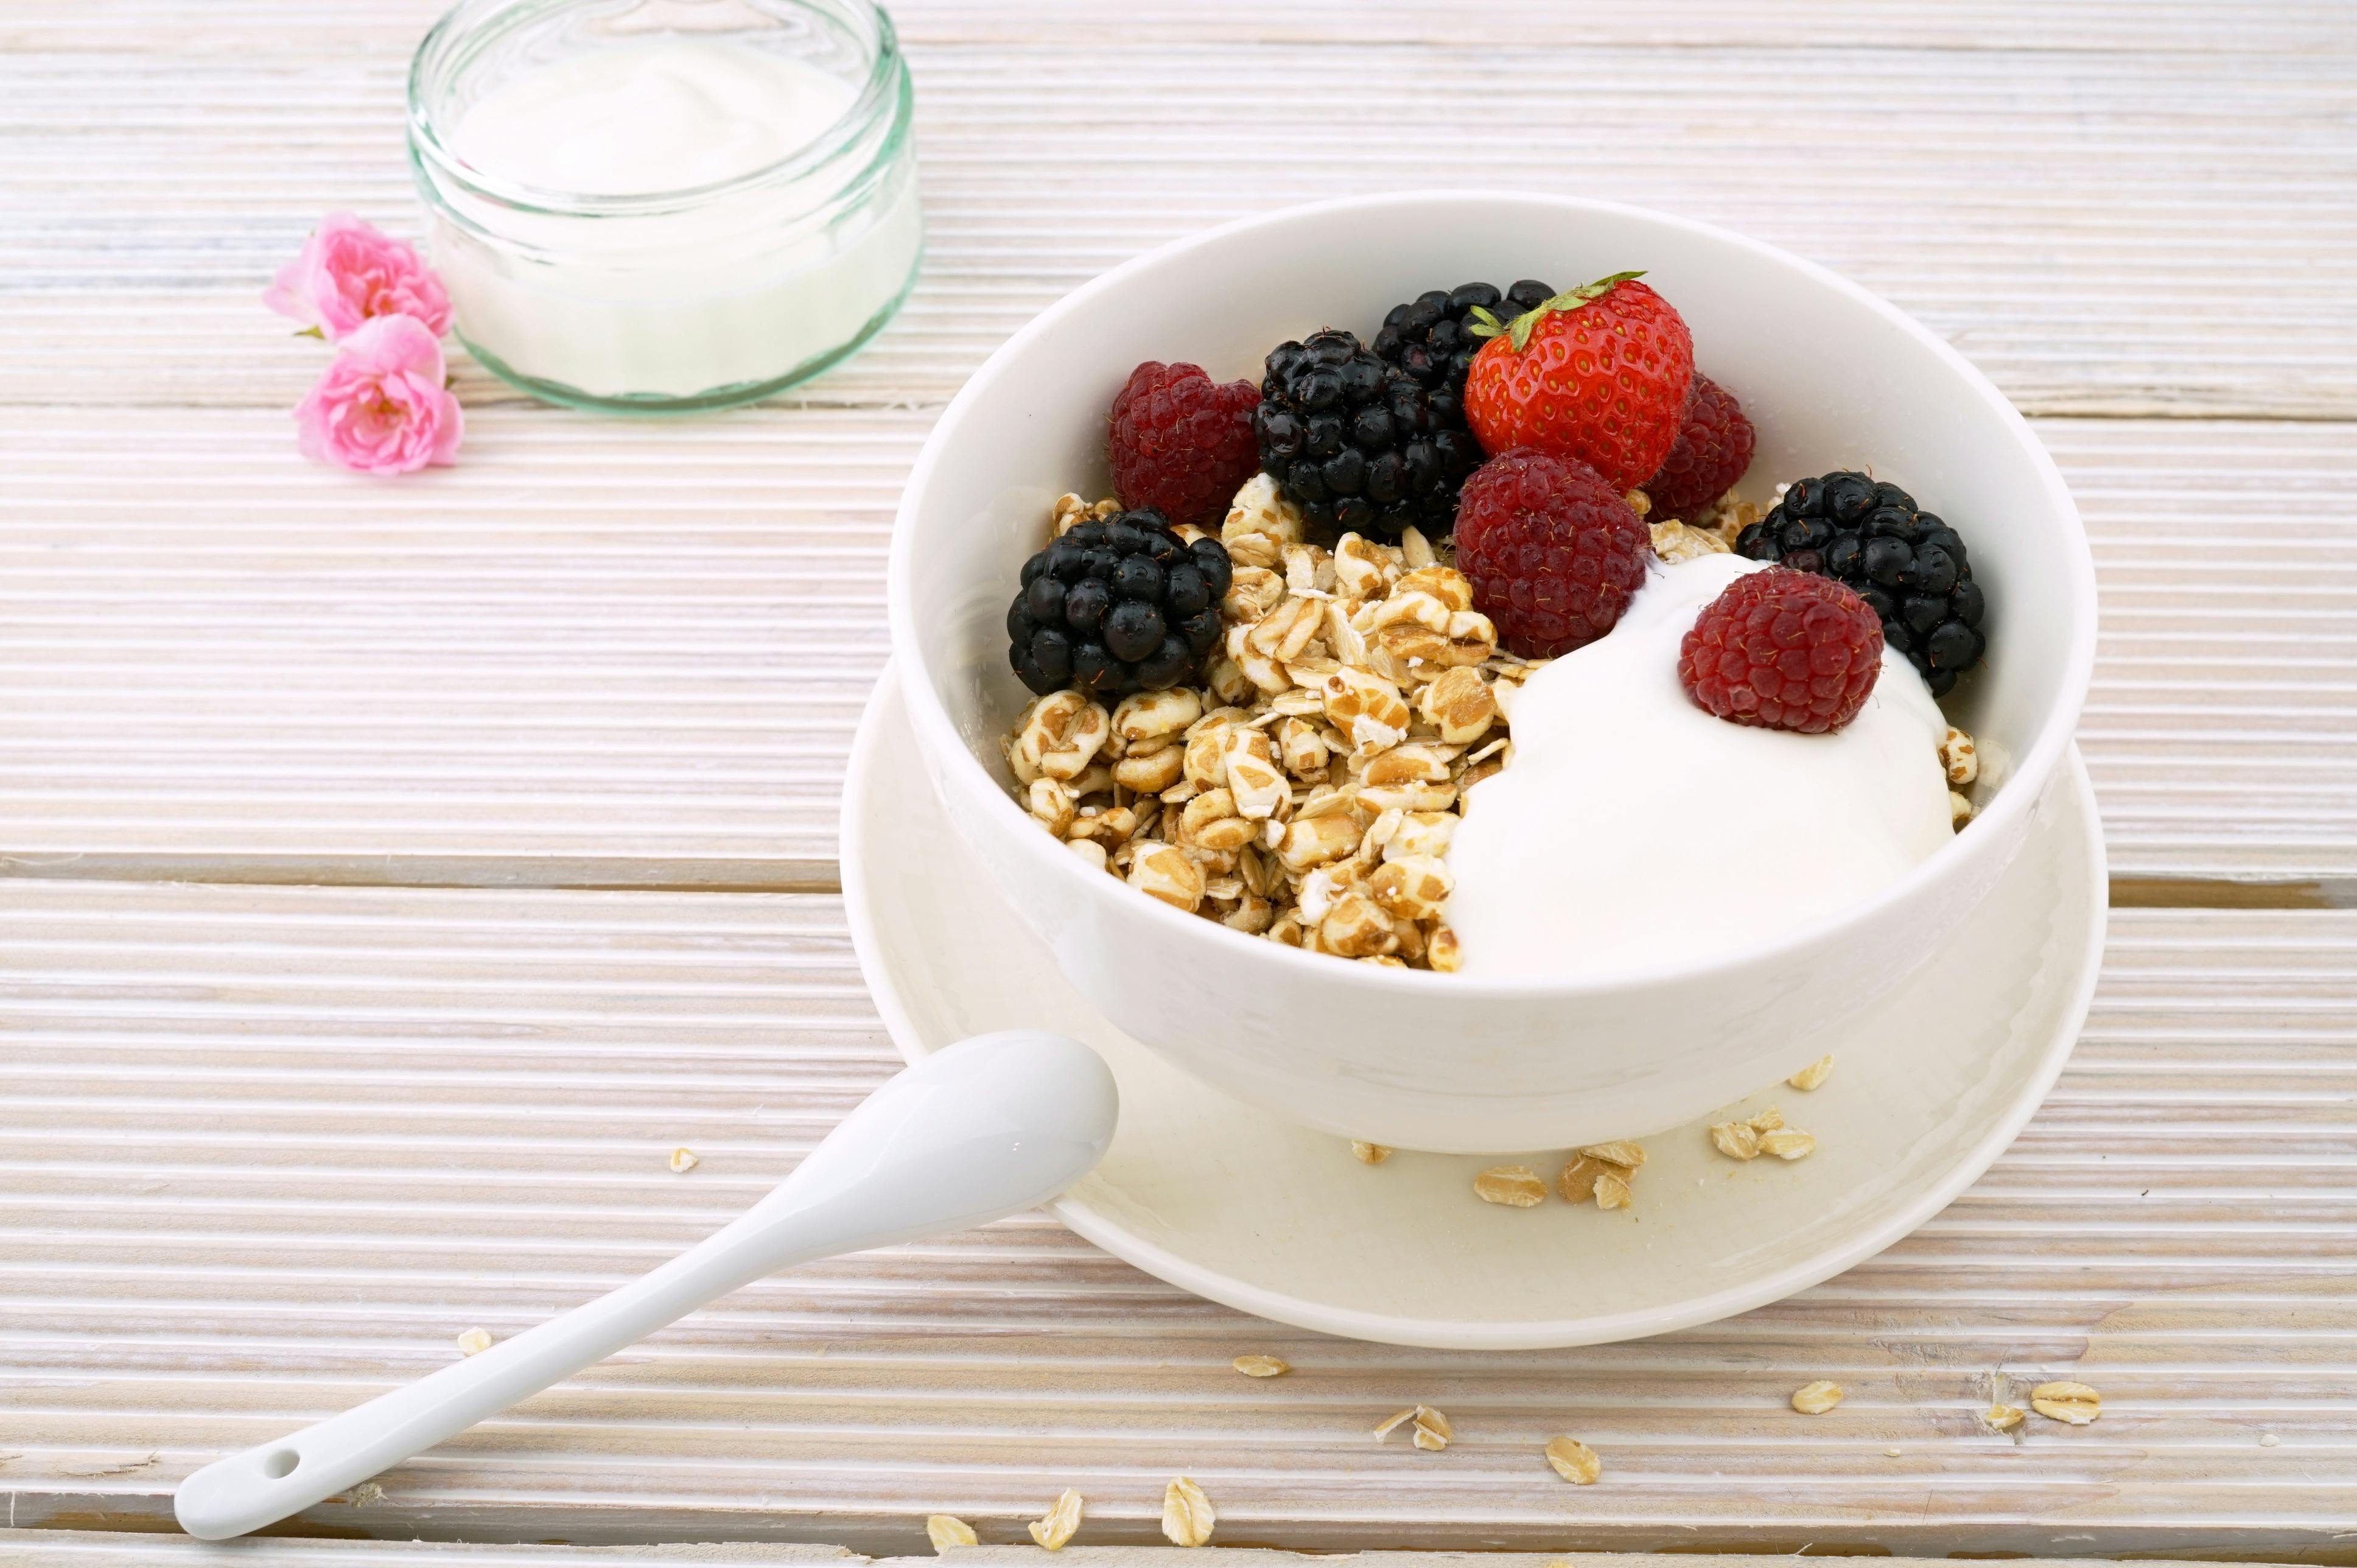 Greek Yogurt: Protein and Probiotics - one of the 7 Power Foods to Supercharge Your Muscle Growth (Backed by Science)